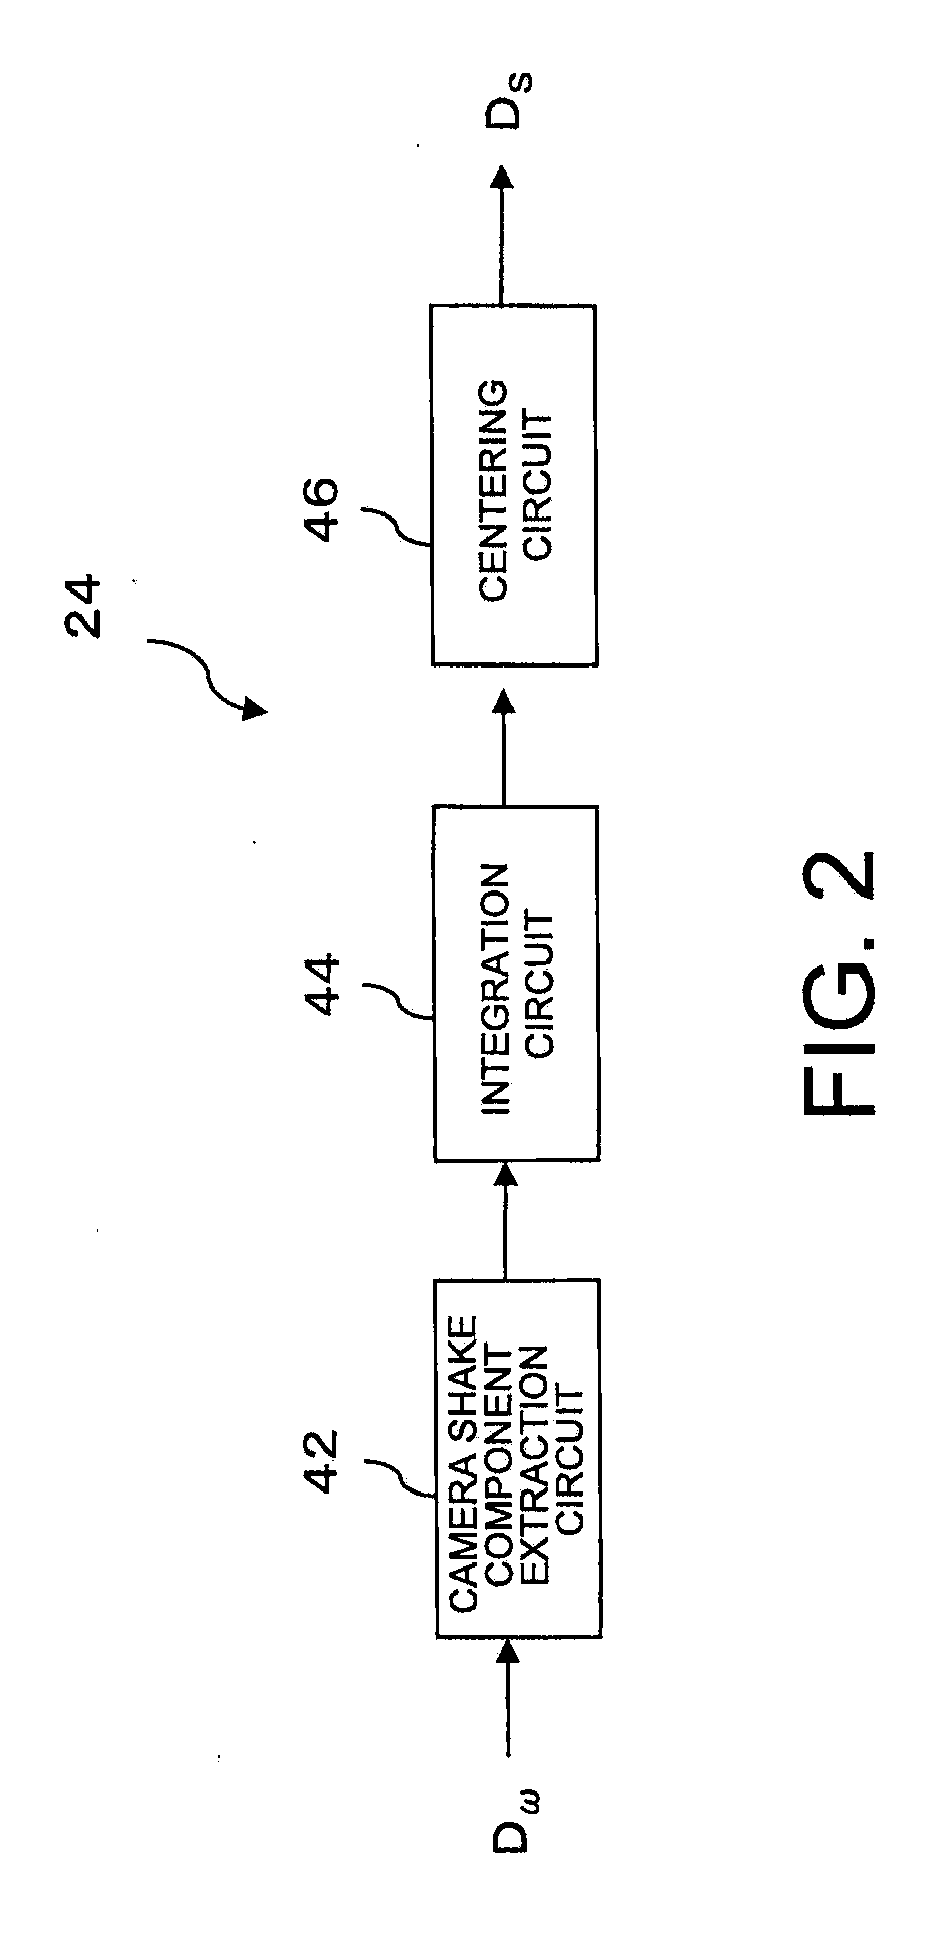 Control circuit for image-capturing device